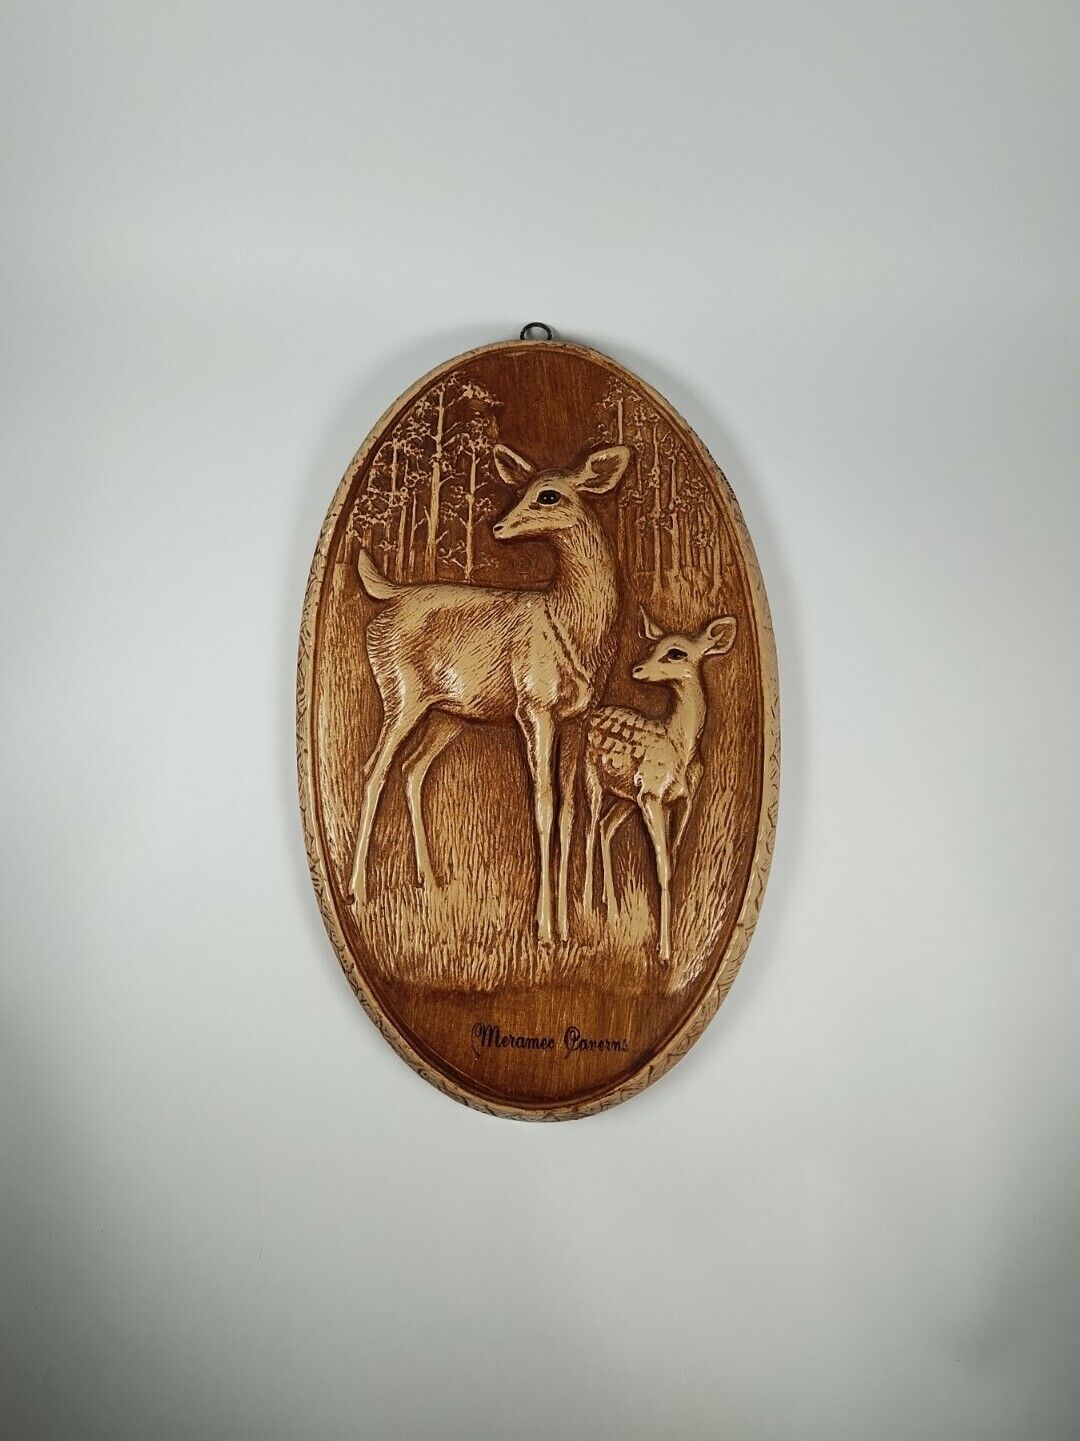 Vintage Oval Chalkware 3D Wall Hanging Deer Carving Souvenir Orn-a-Craft 1945